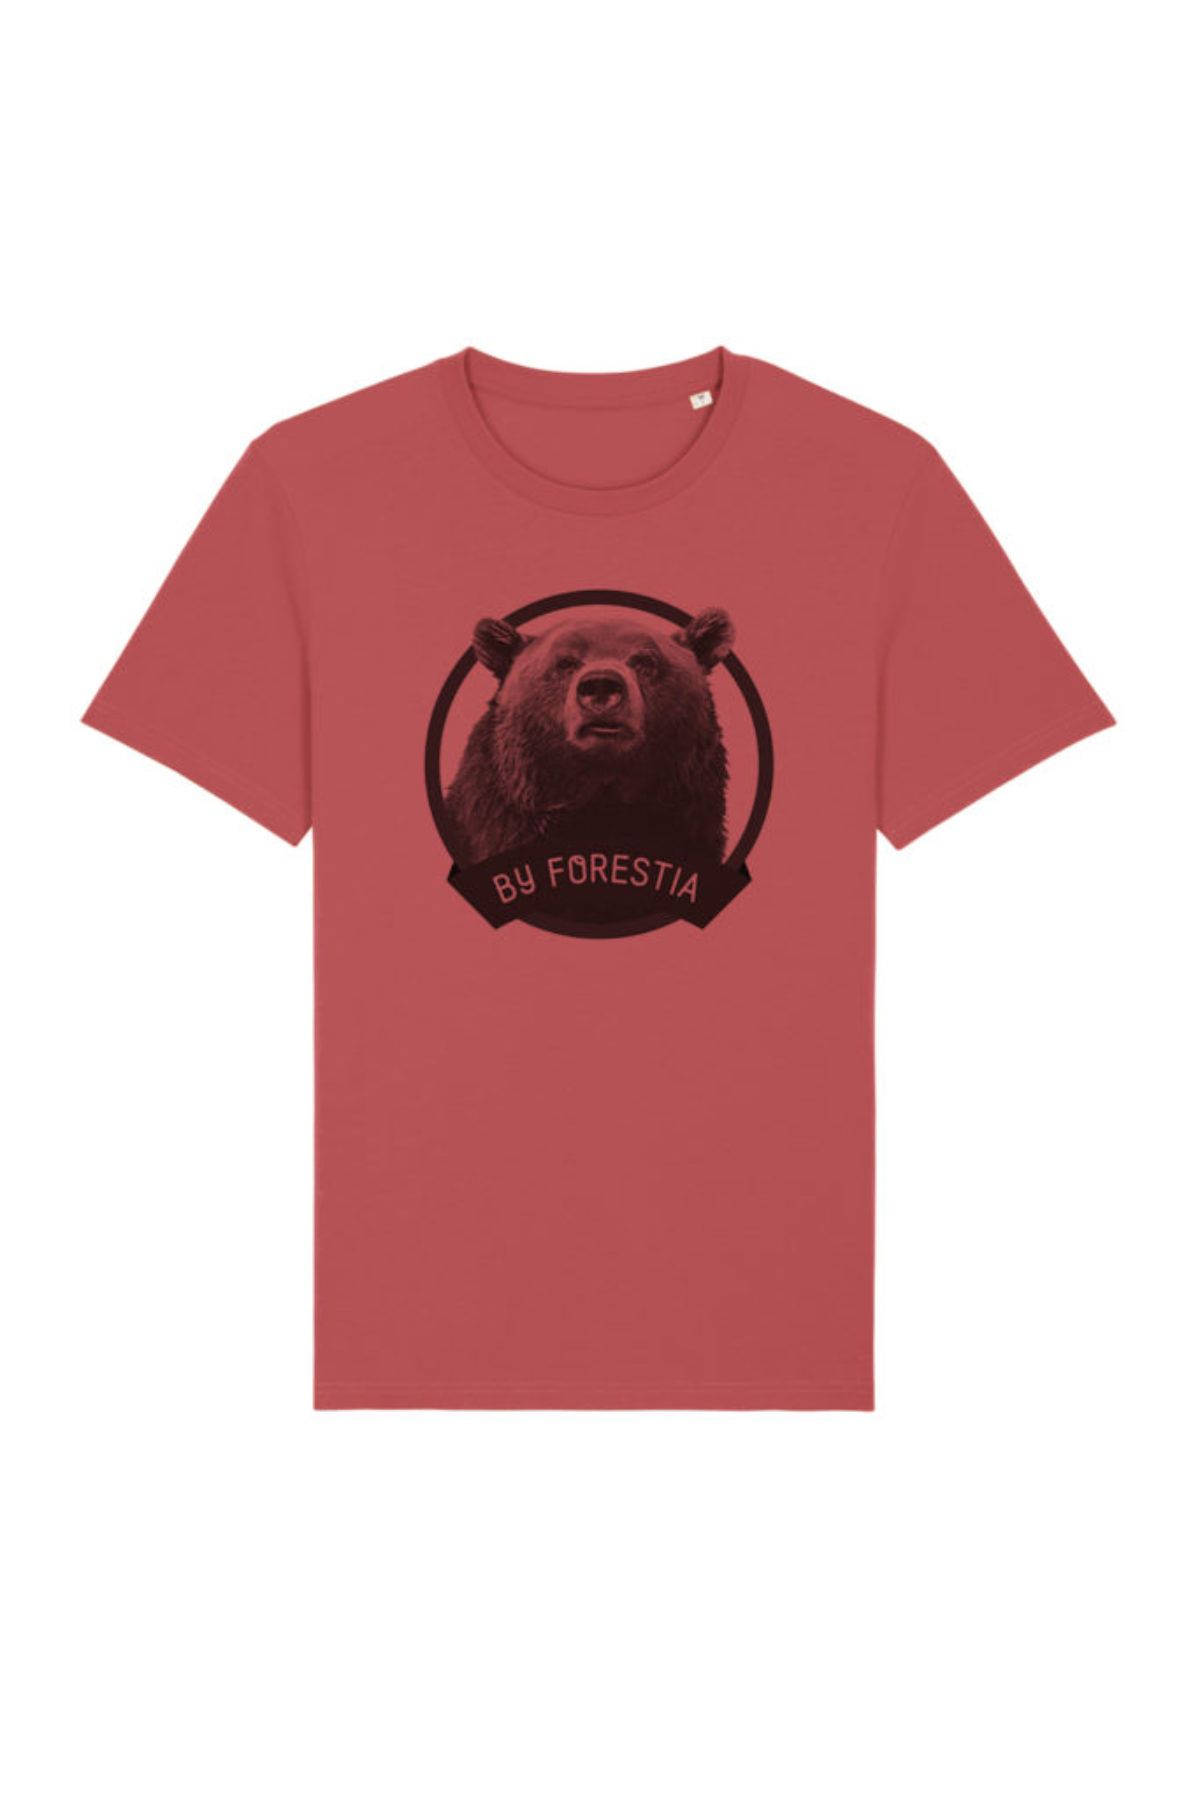 T-shirt adulte - Ours